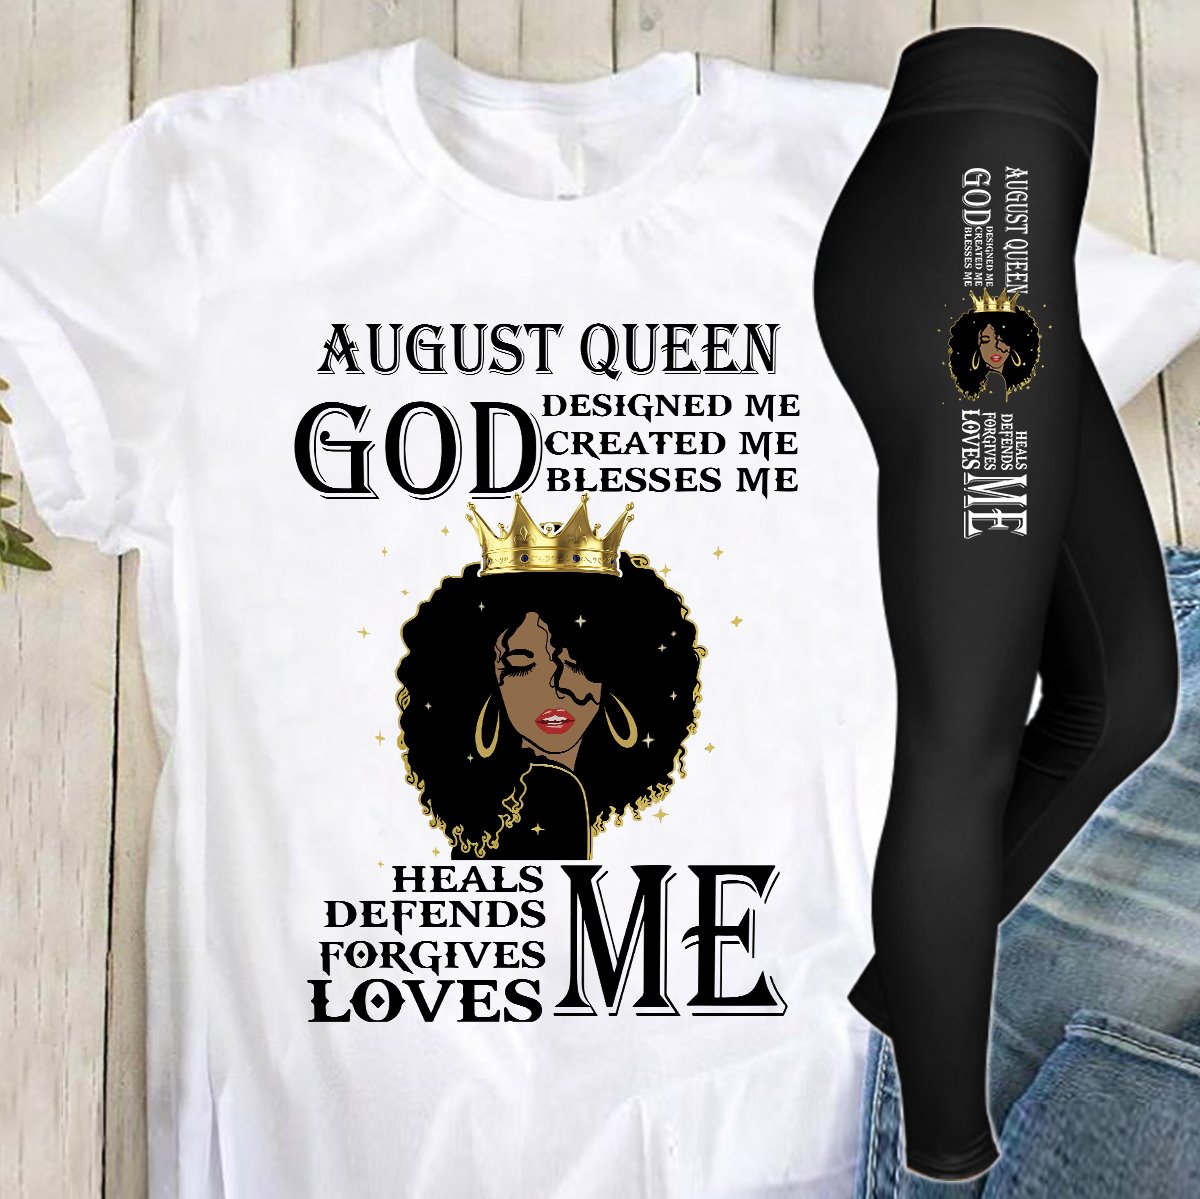 August queen god designed me, created me, blesses me, heals me, fefends me, forgives me